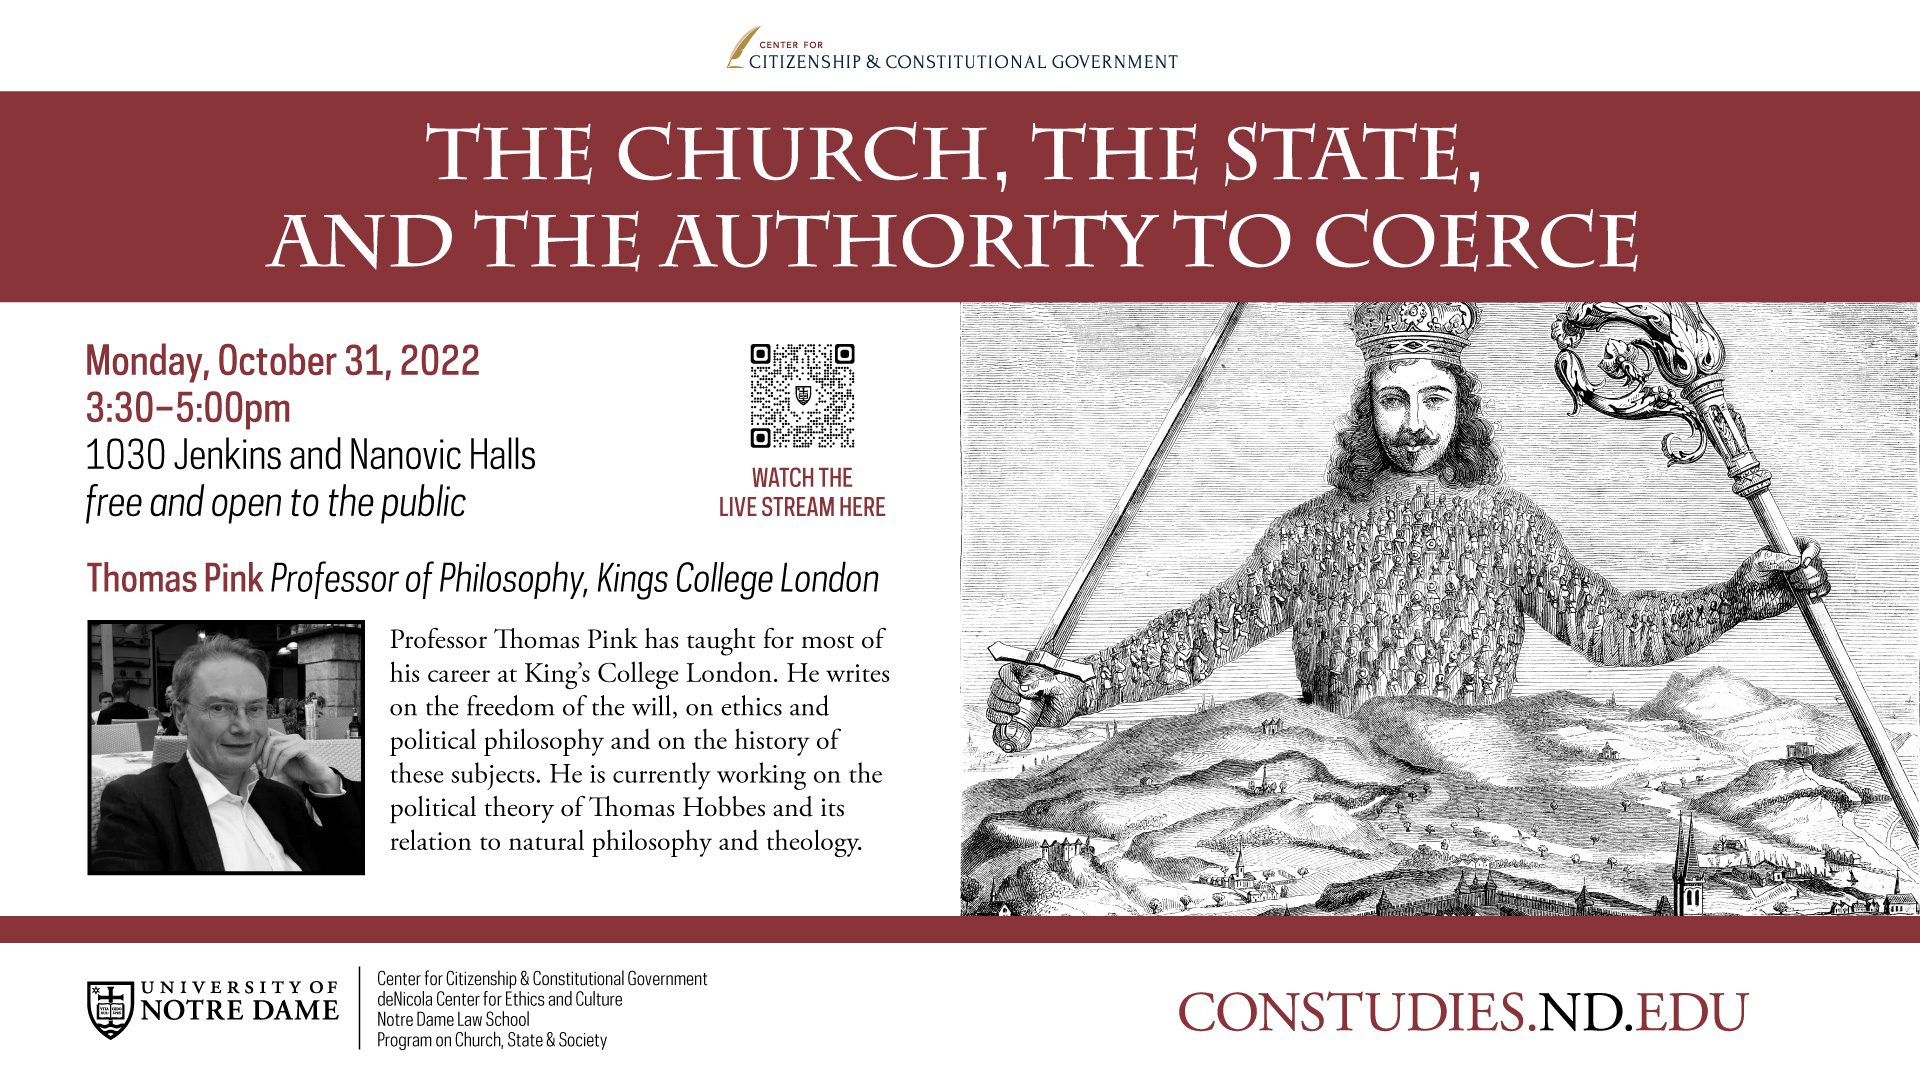 Lecture by Thomas Pink: “The Church, the State, and the Authority to Coerce”